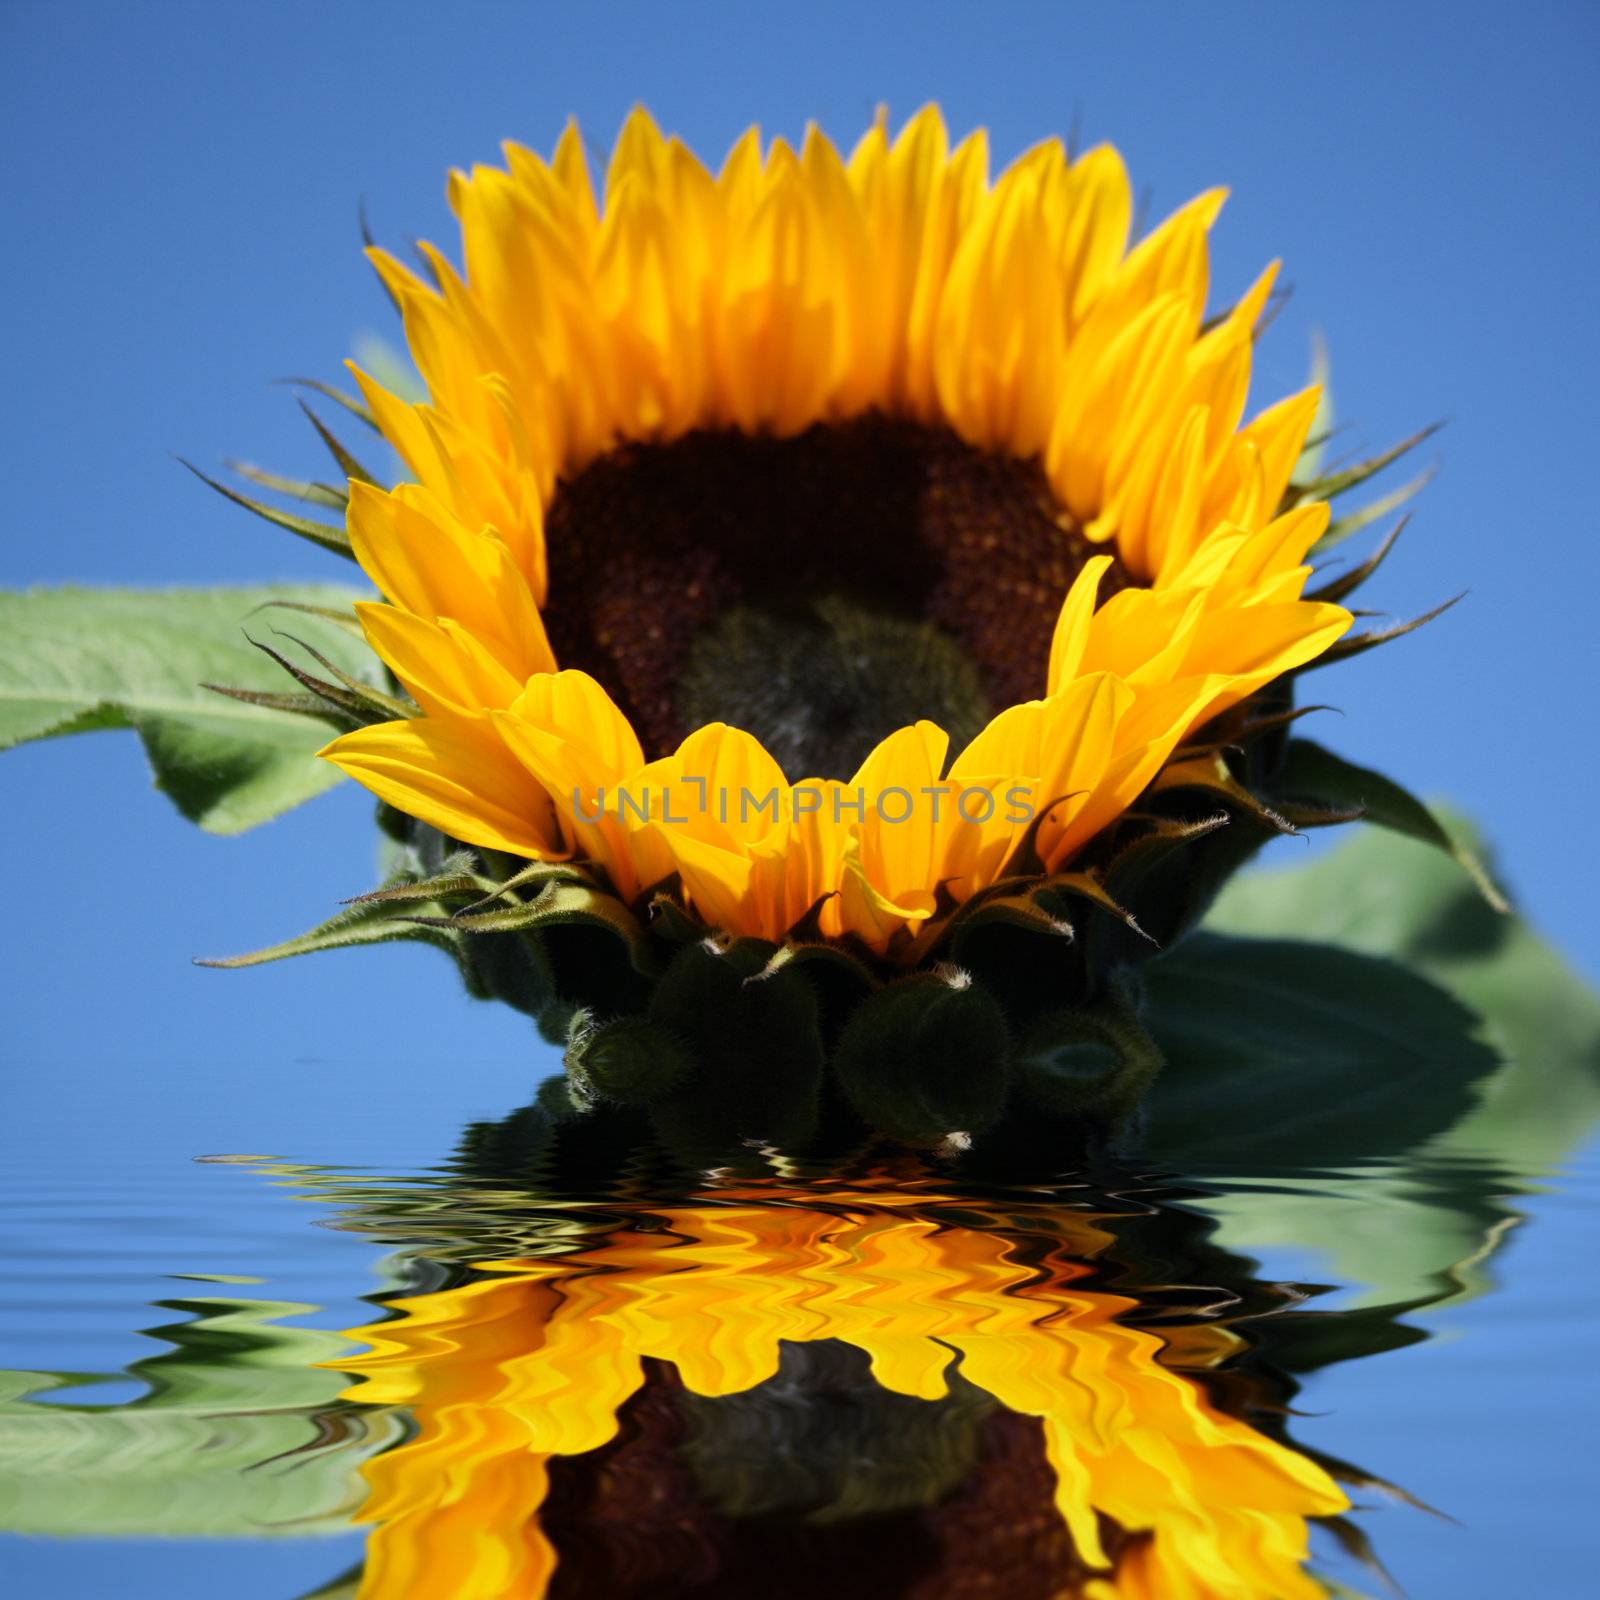 sunflower in the water by photochecker